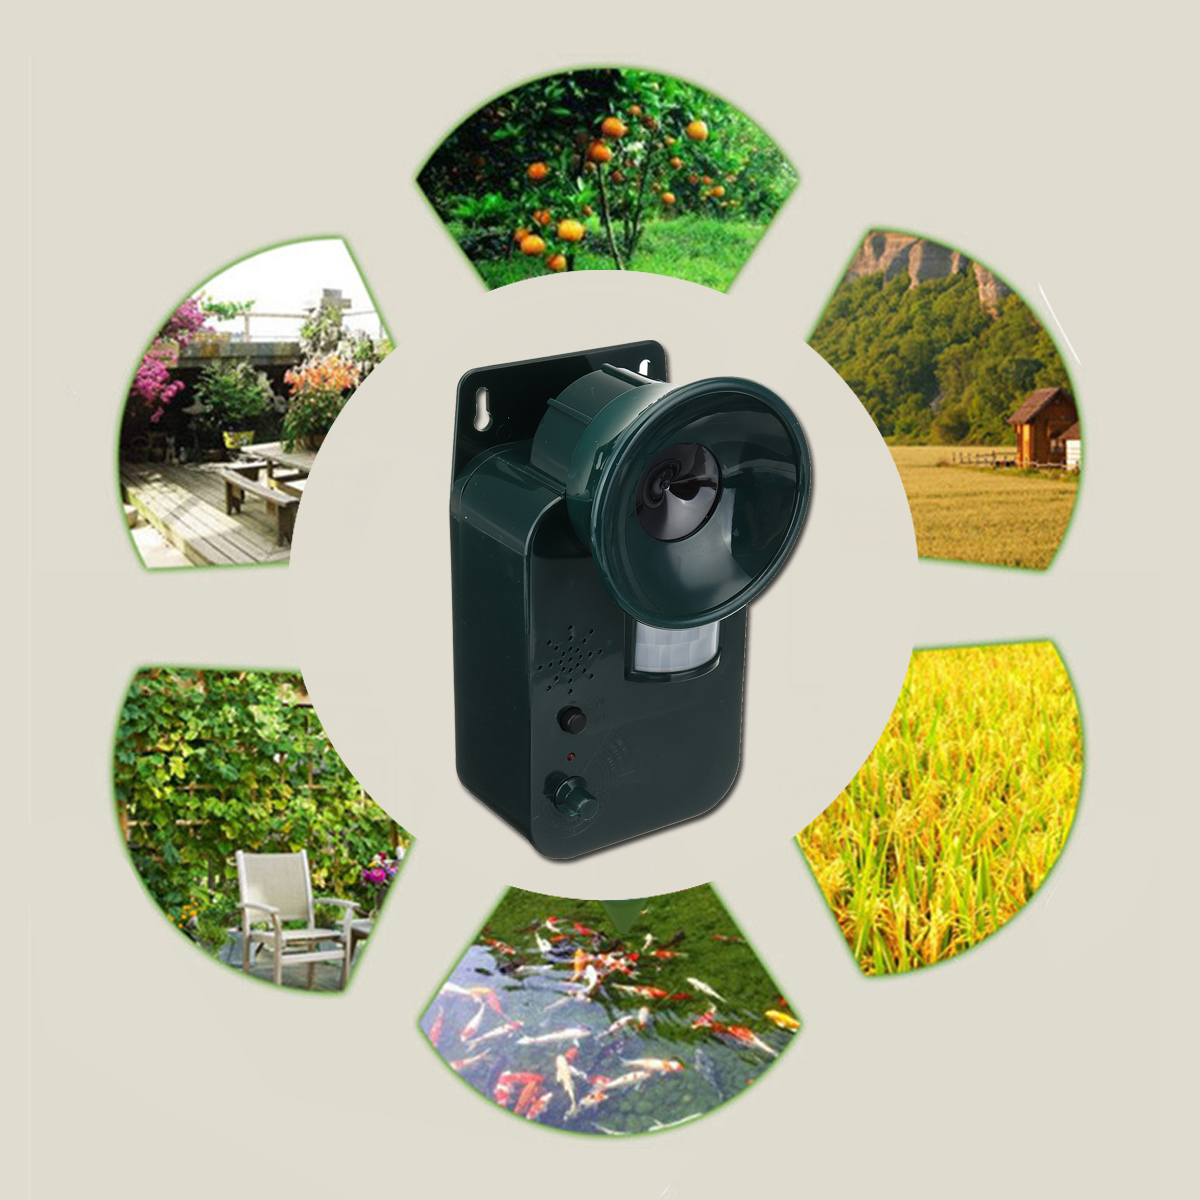 5000sqft-9V-DC-Ultra-sonic-Cordless-Pest-Animal-Repeller-Outdoor-Safely-Repel-Various-Animal-1304035-3